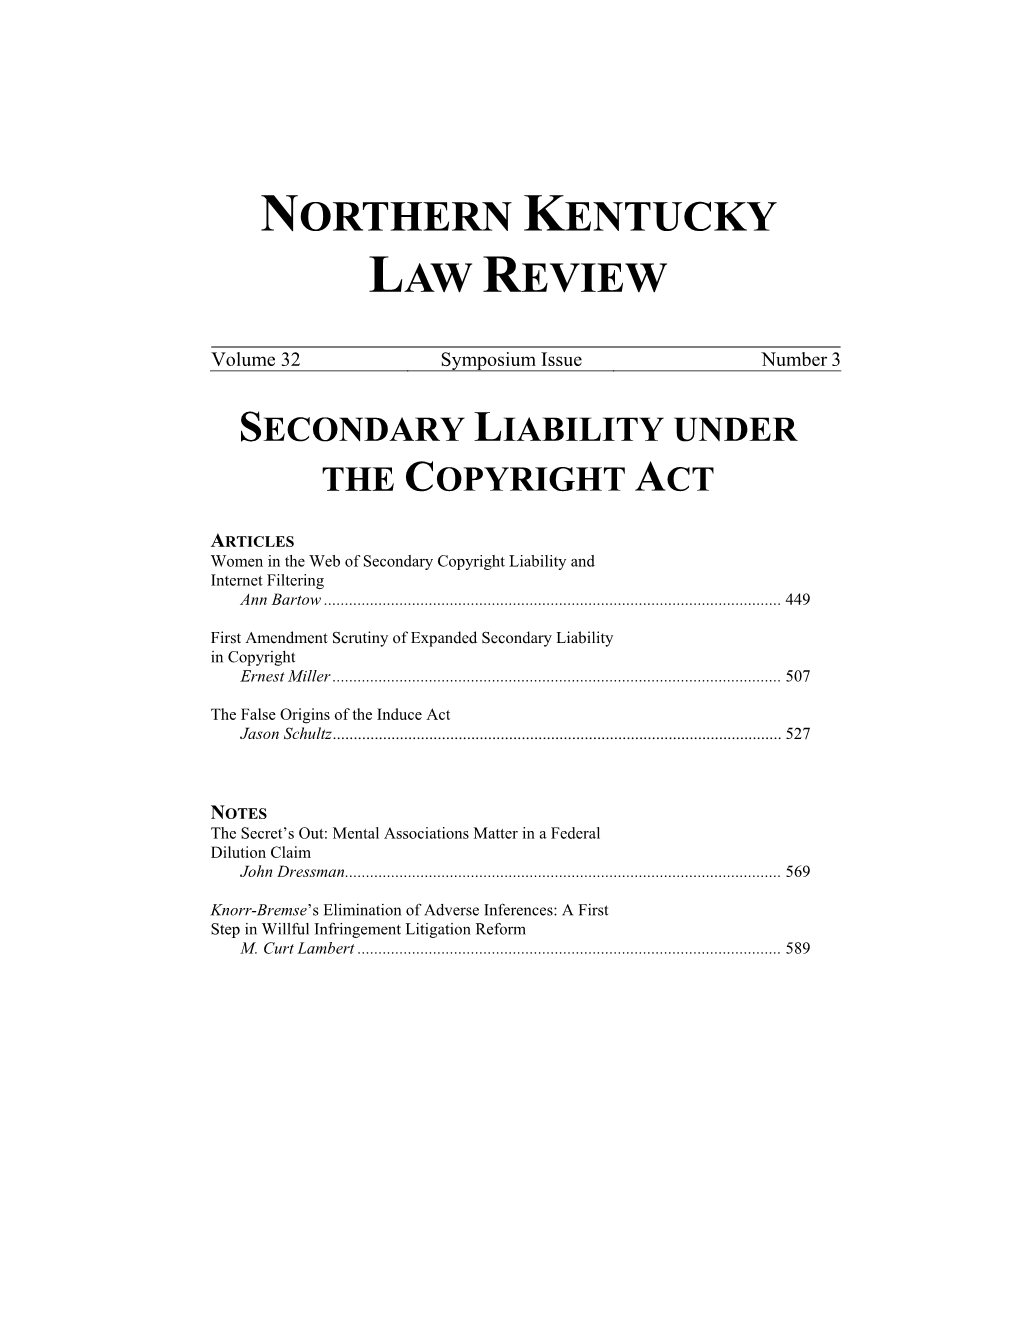 Northern Kentucky Law Review